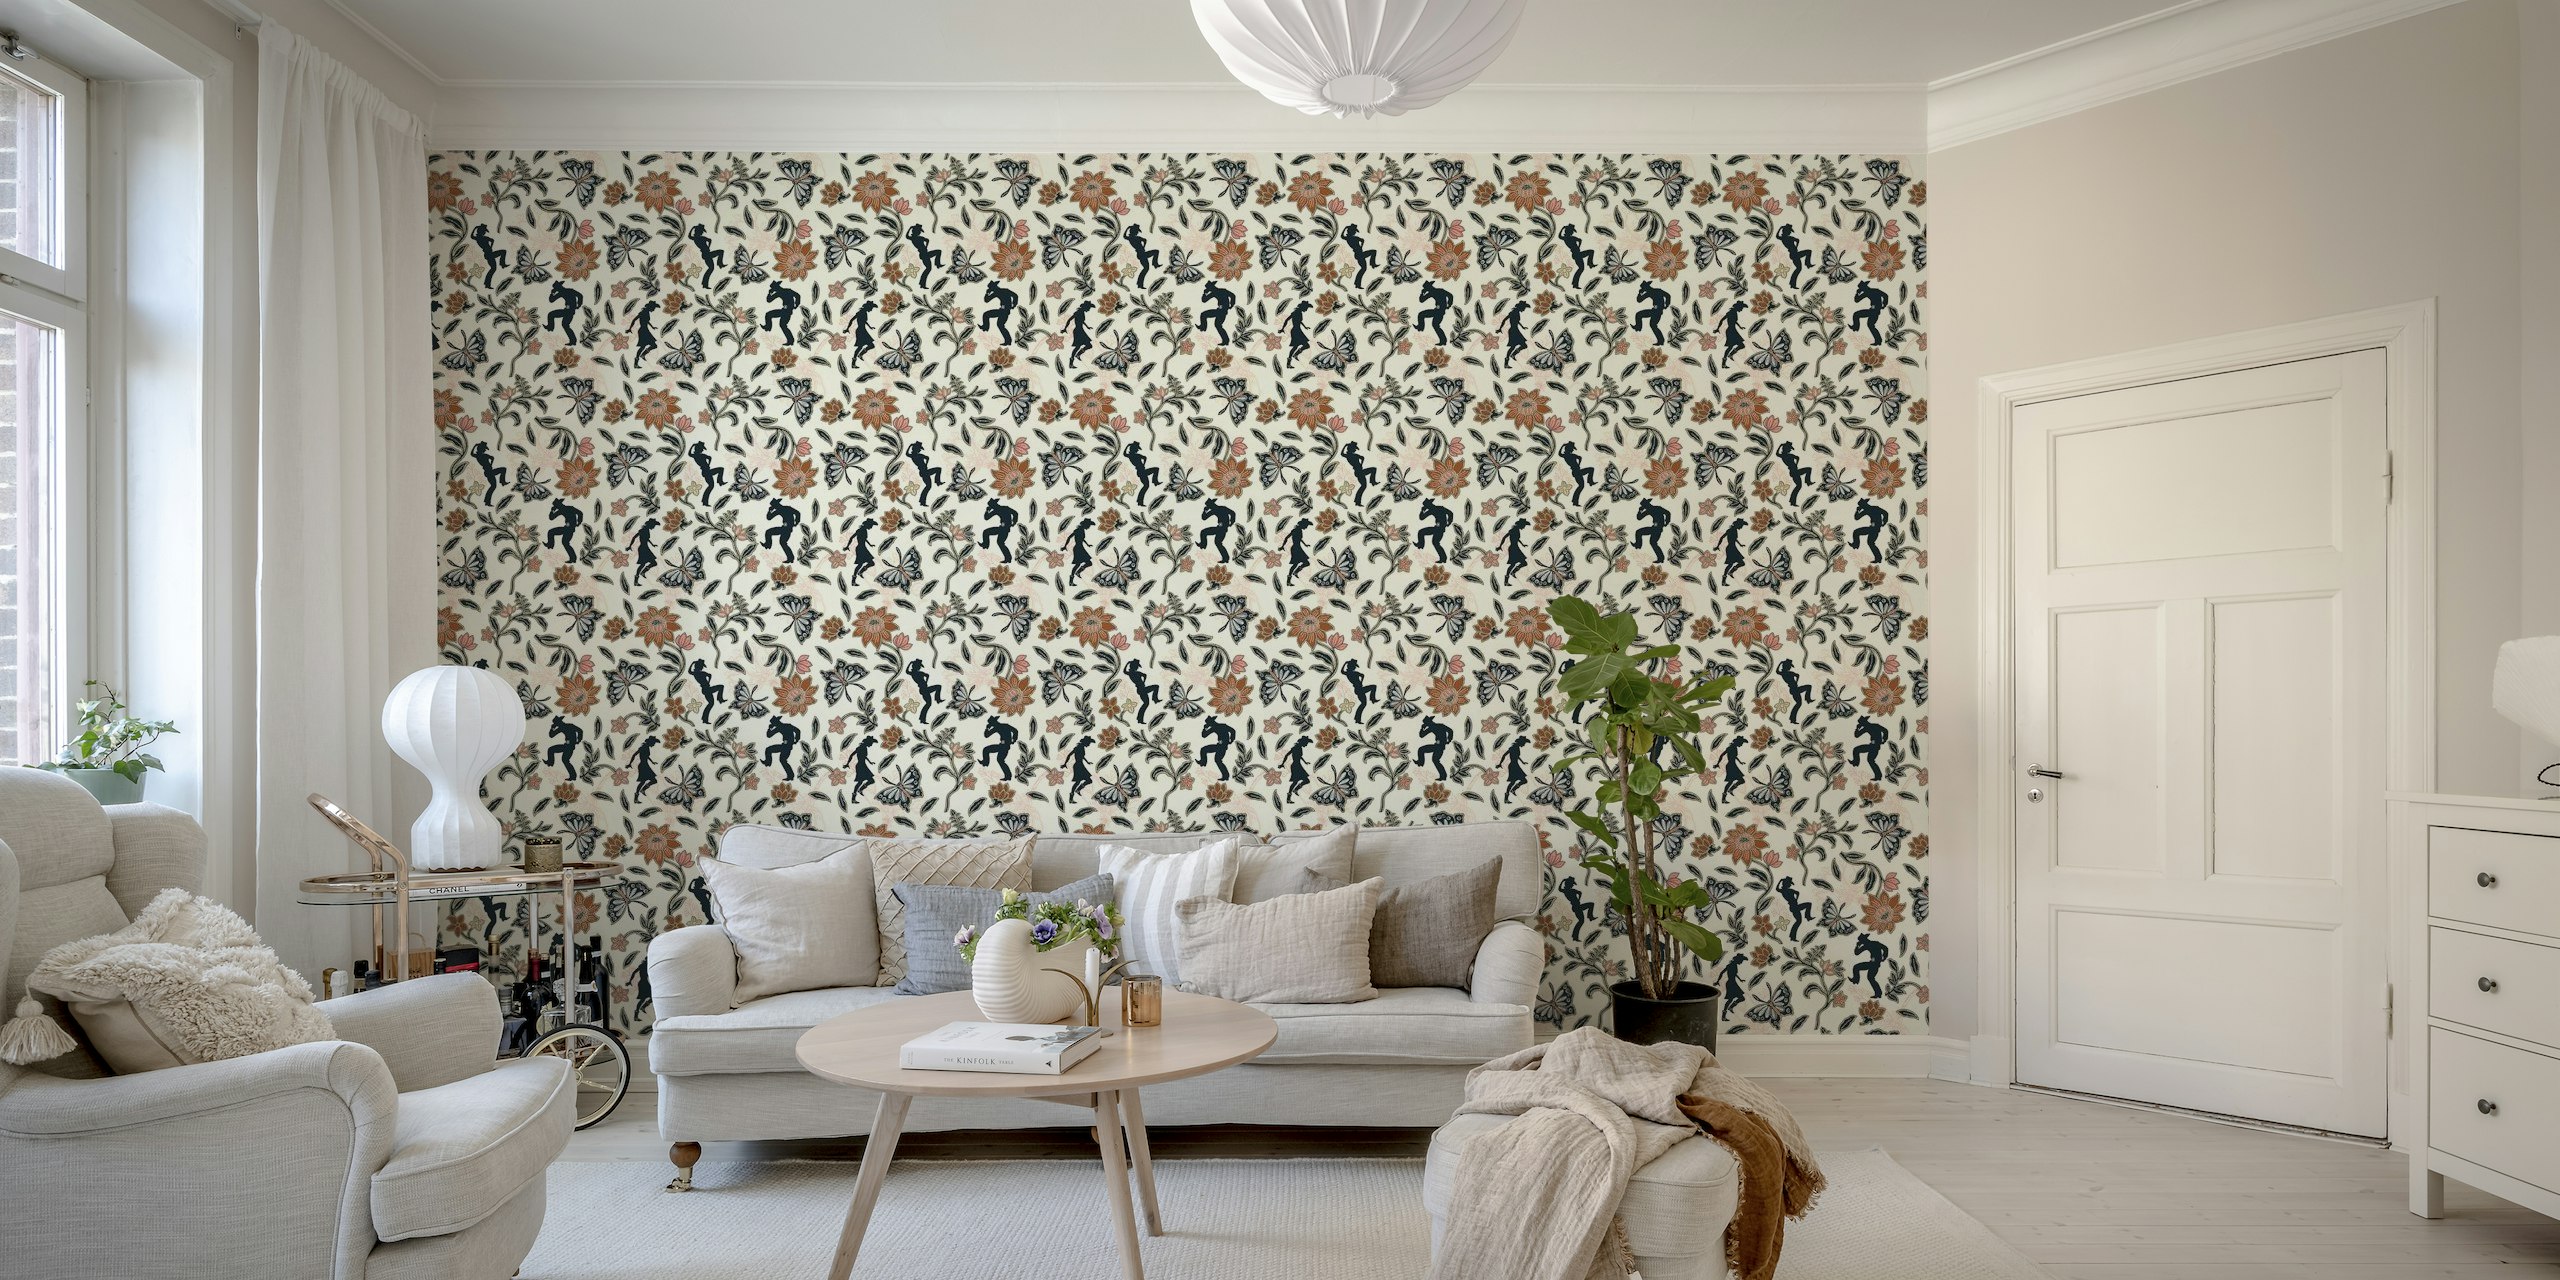 Western wild nature inspired wall mural with floral patterns and cowboy silhouettes